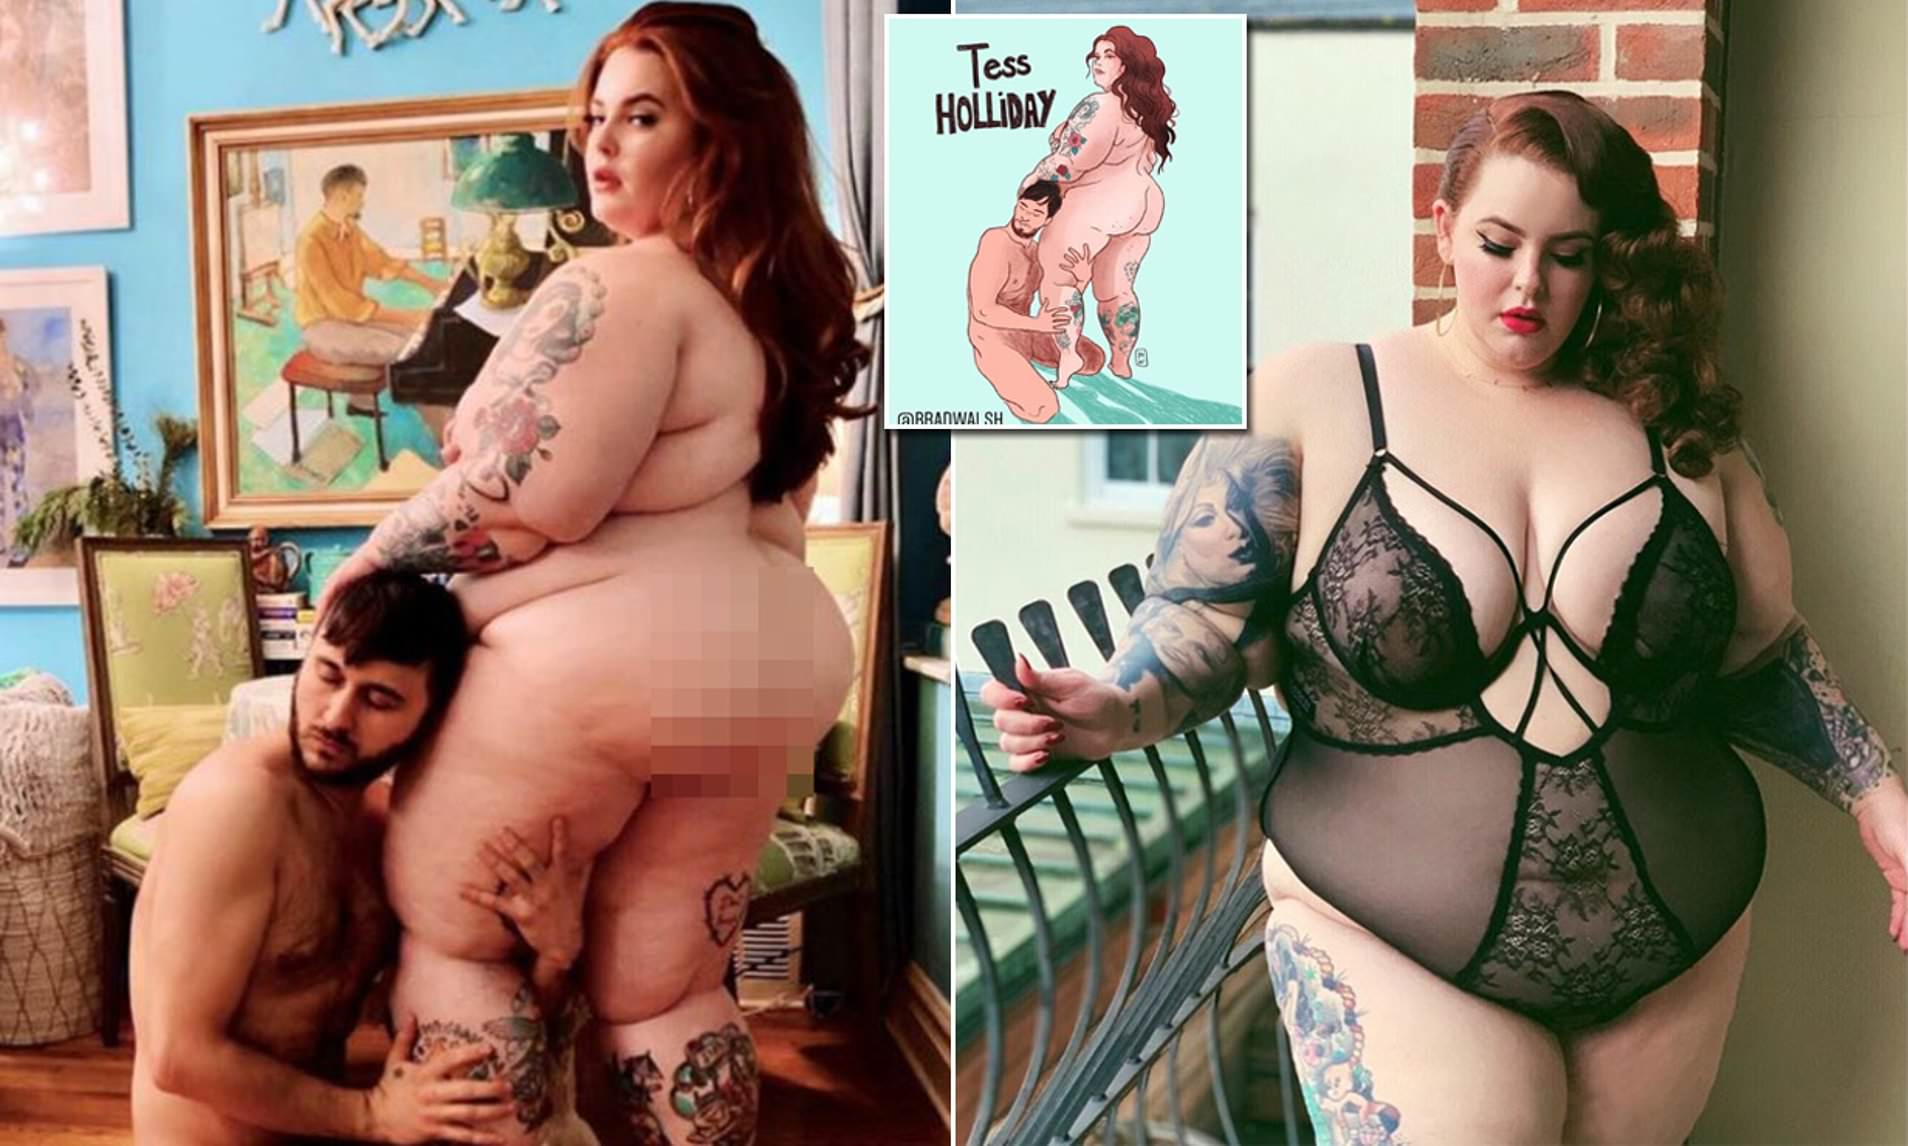 cammie willis recommends tess holliday nude pic